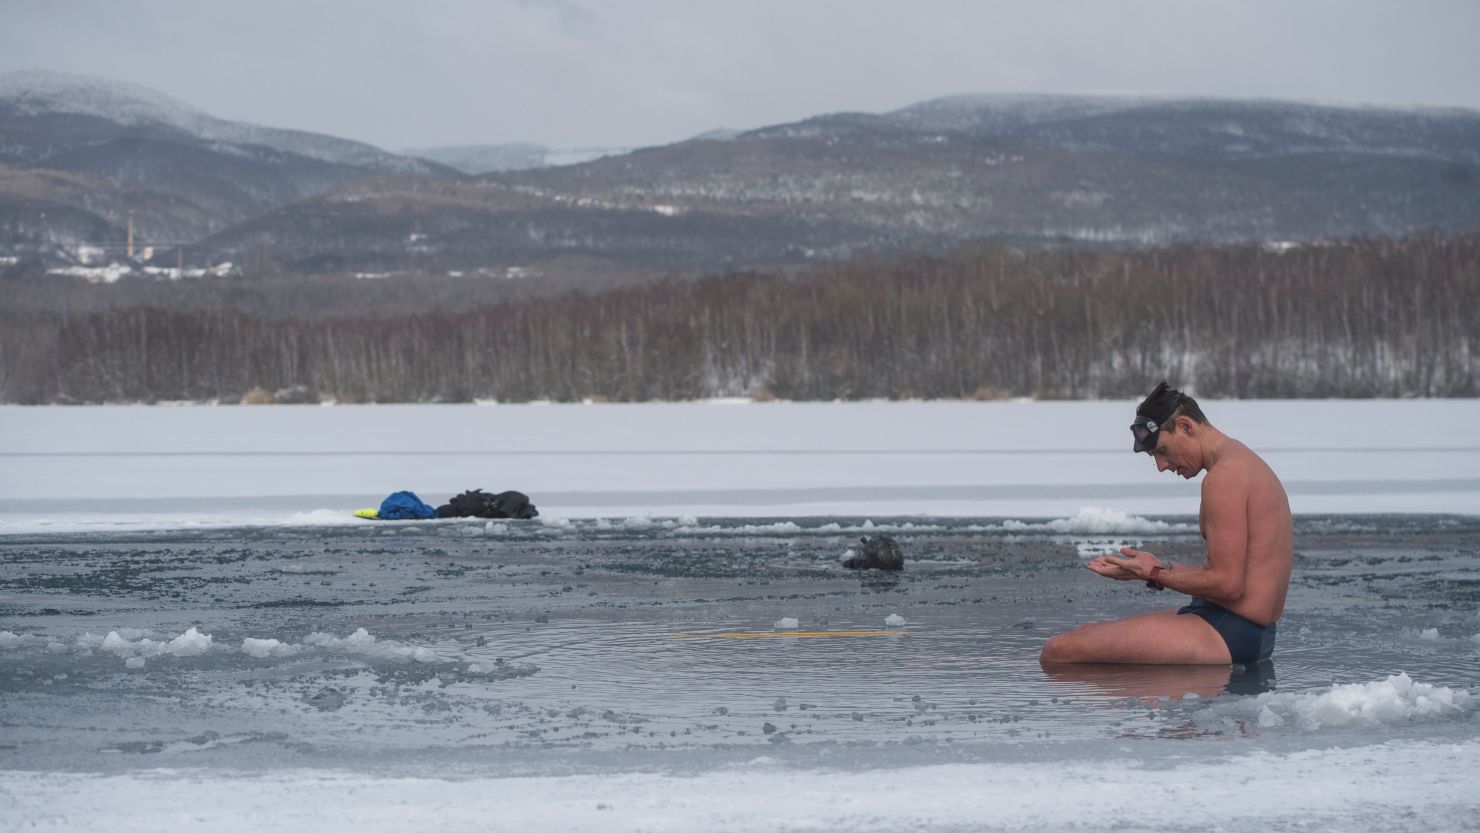 Czech freediver David Vencl rests on the icy Barbora lake near Teplice city, Czech Republic, on February 13, 2021 after his training to break the Guinness world record for the longest swim under ice.